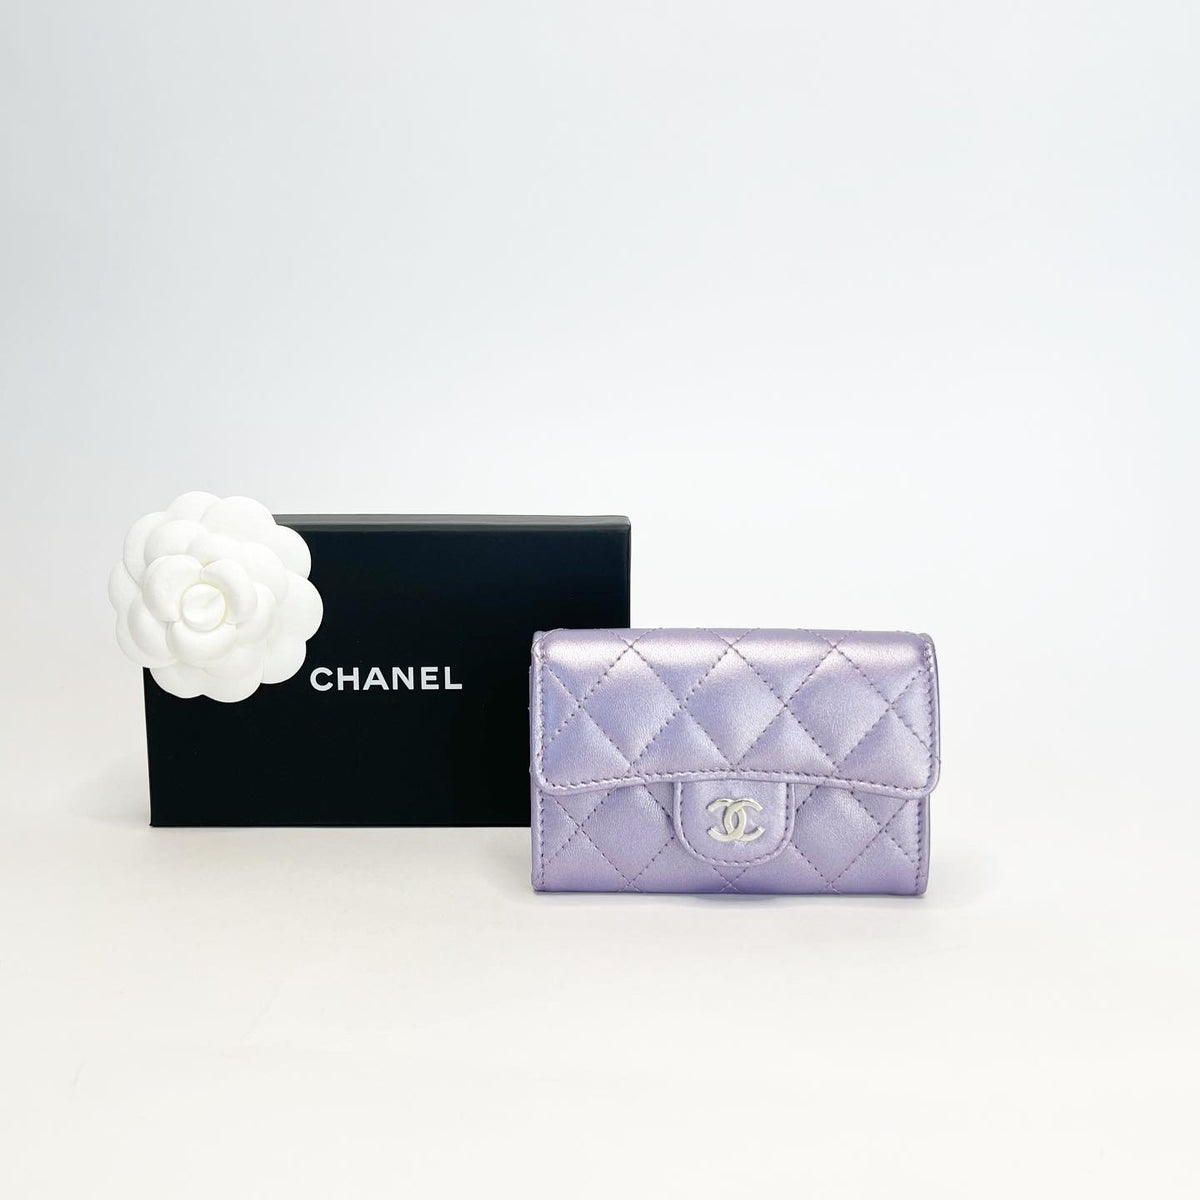 CHANEL CLASSIC FLAP CARD HOLDER IN IRRIDESCENT